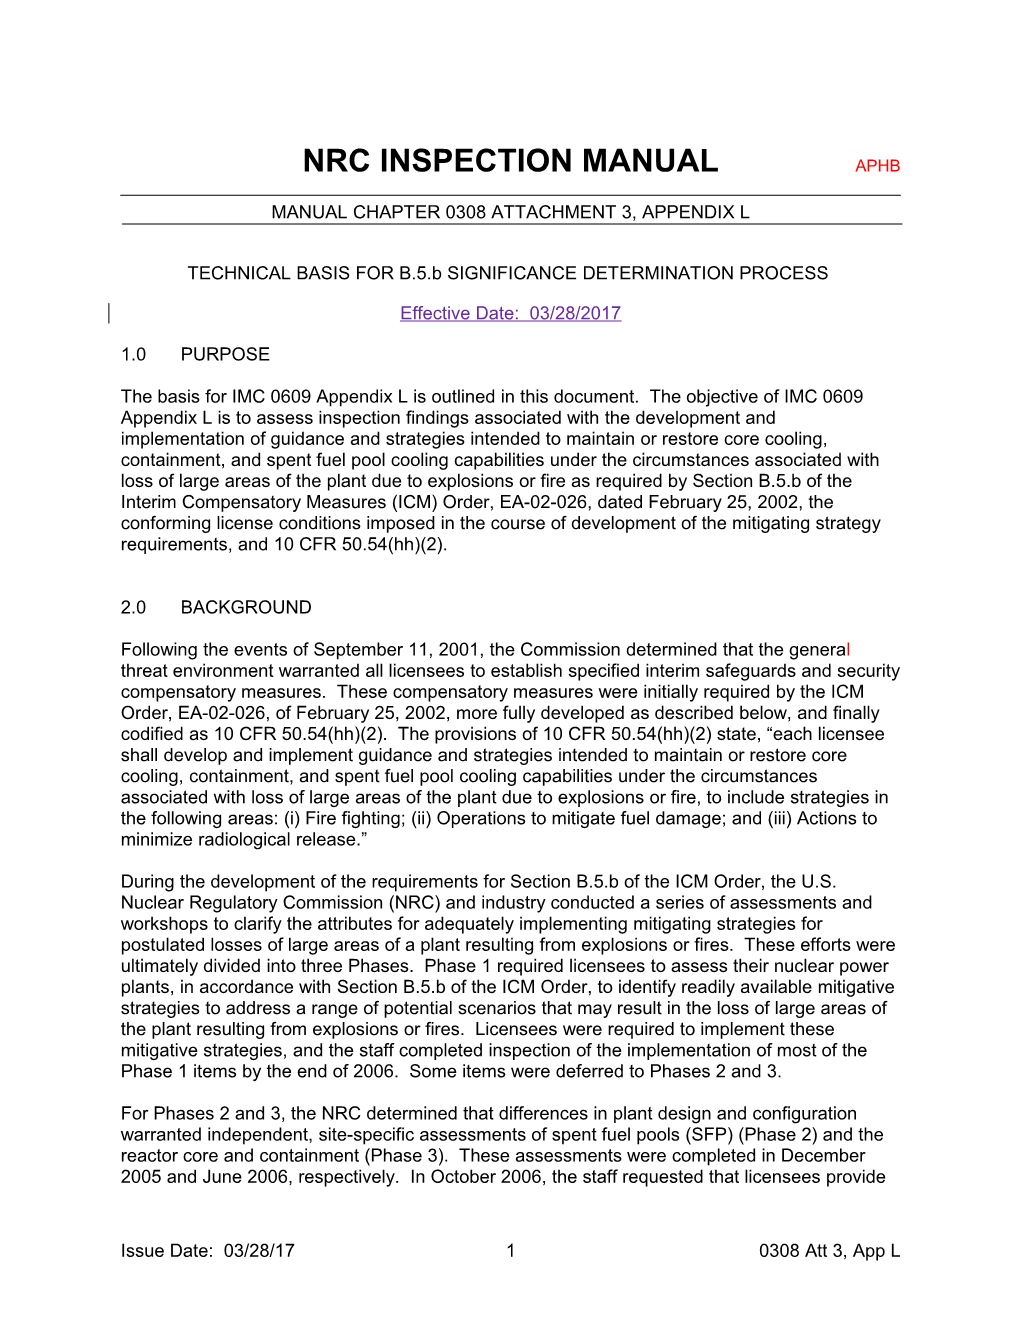 Appendix C Technical Basis for Occupational Radiation Safety Significance Determination Process